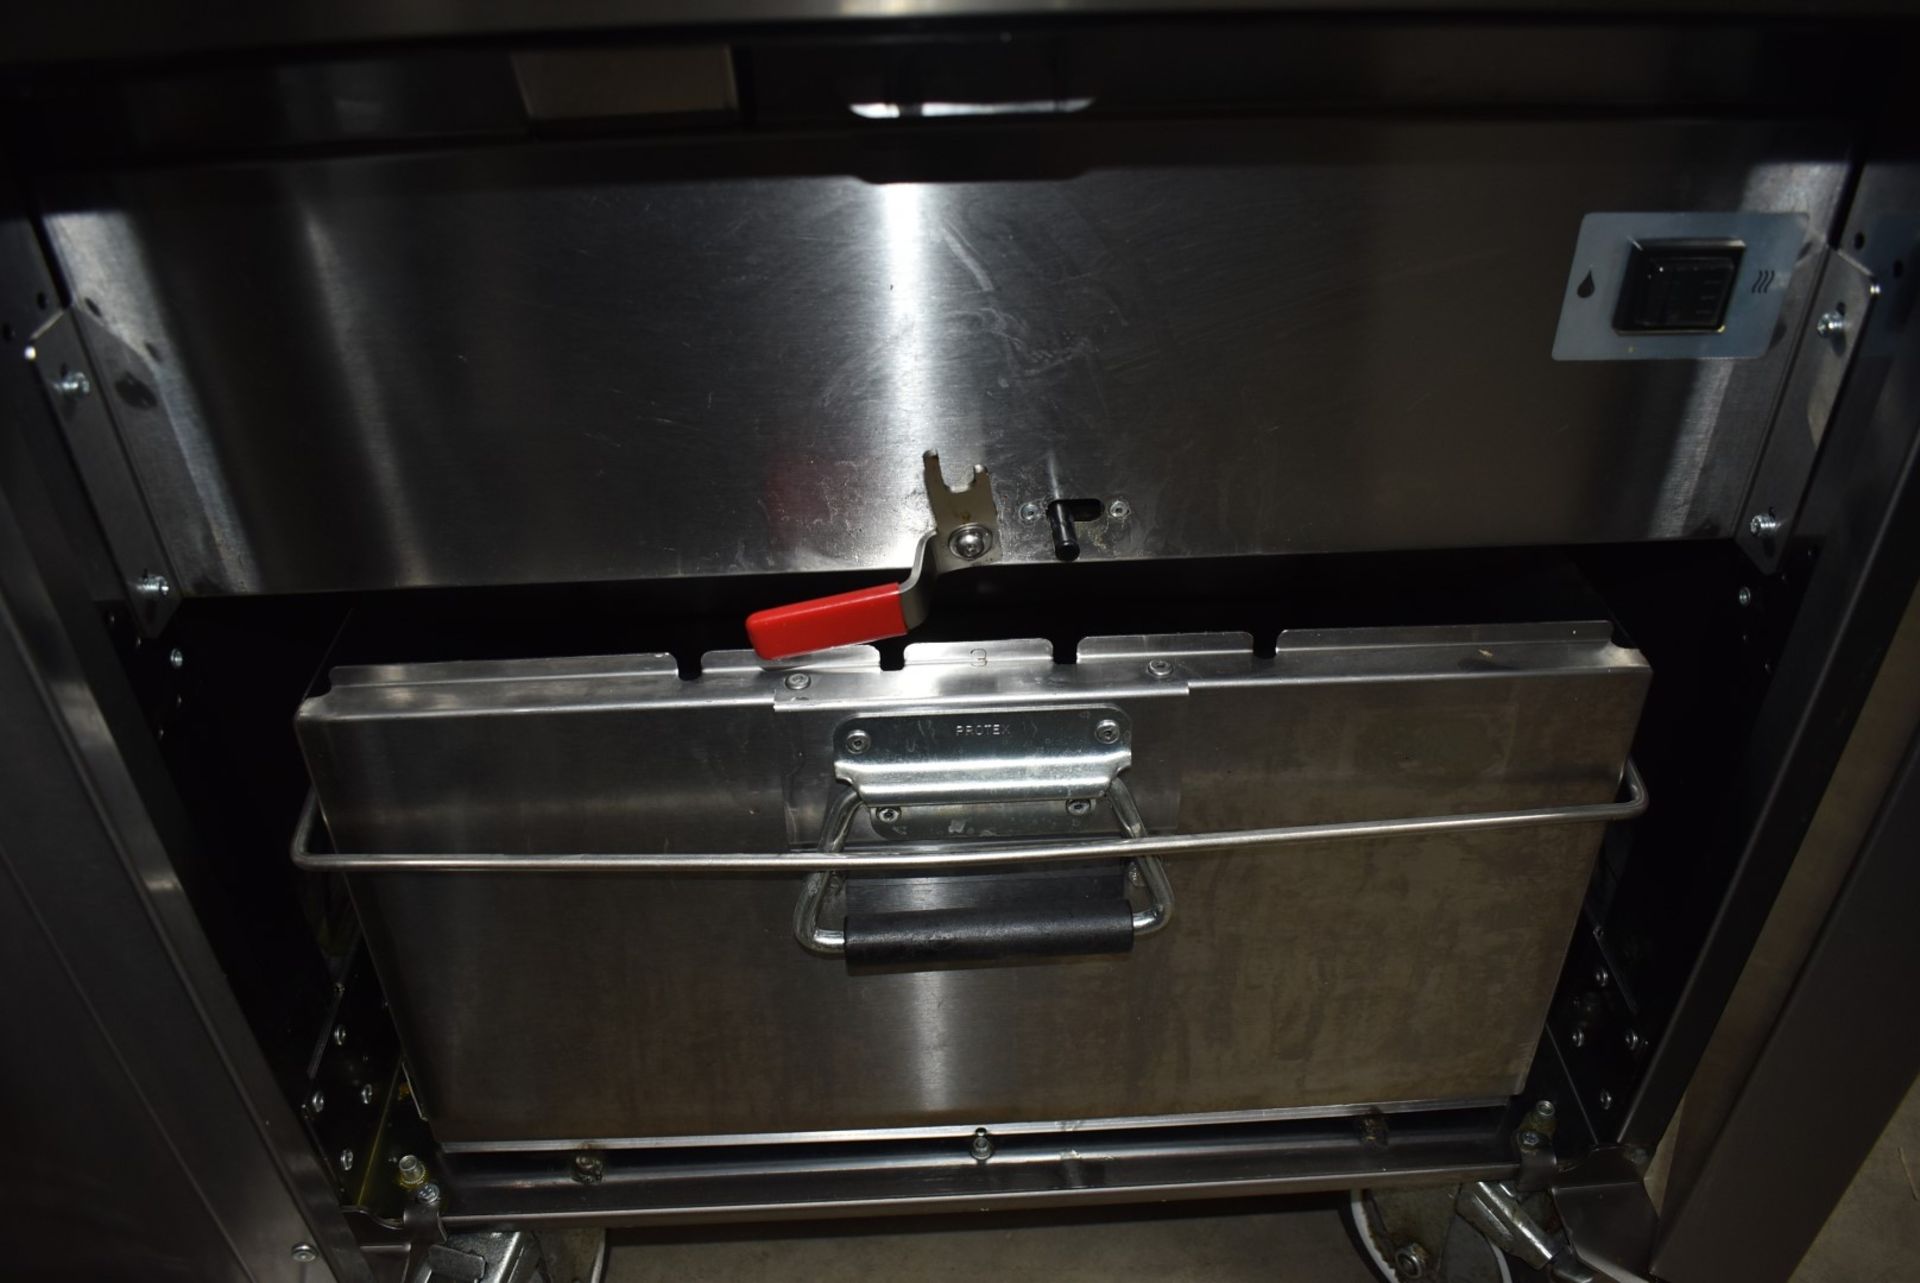 1 x Lincat Opus 800 OE8108 Single Tank Electric Fryer With Filtration - 37L Tank With Two - Image 15 of 17